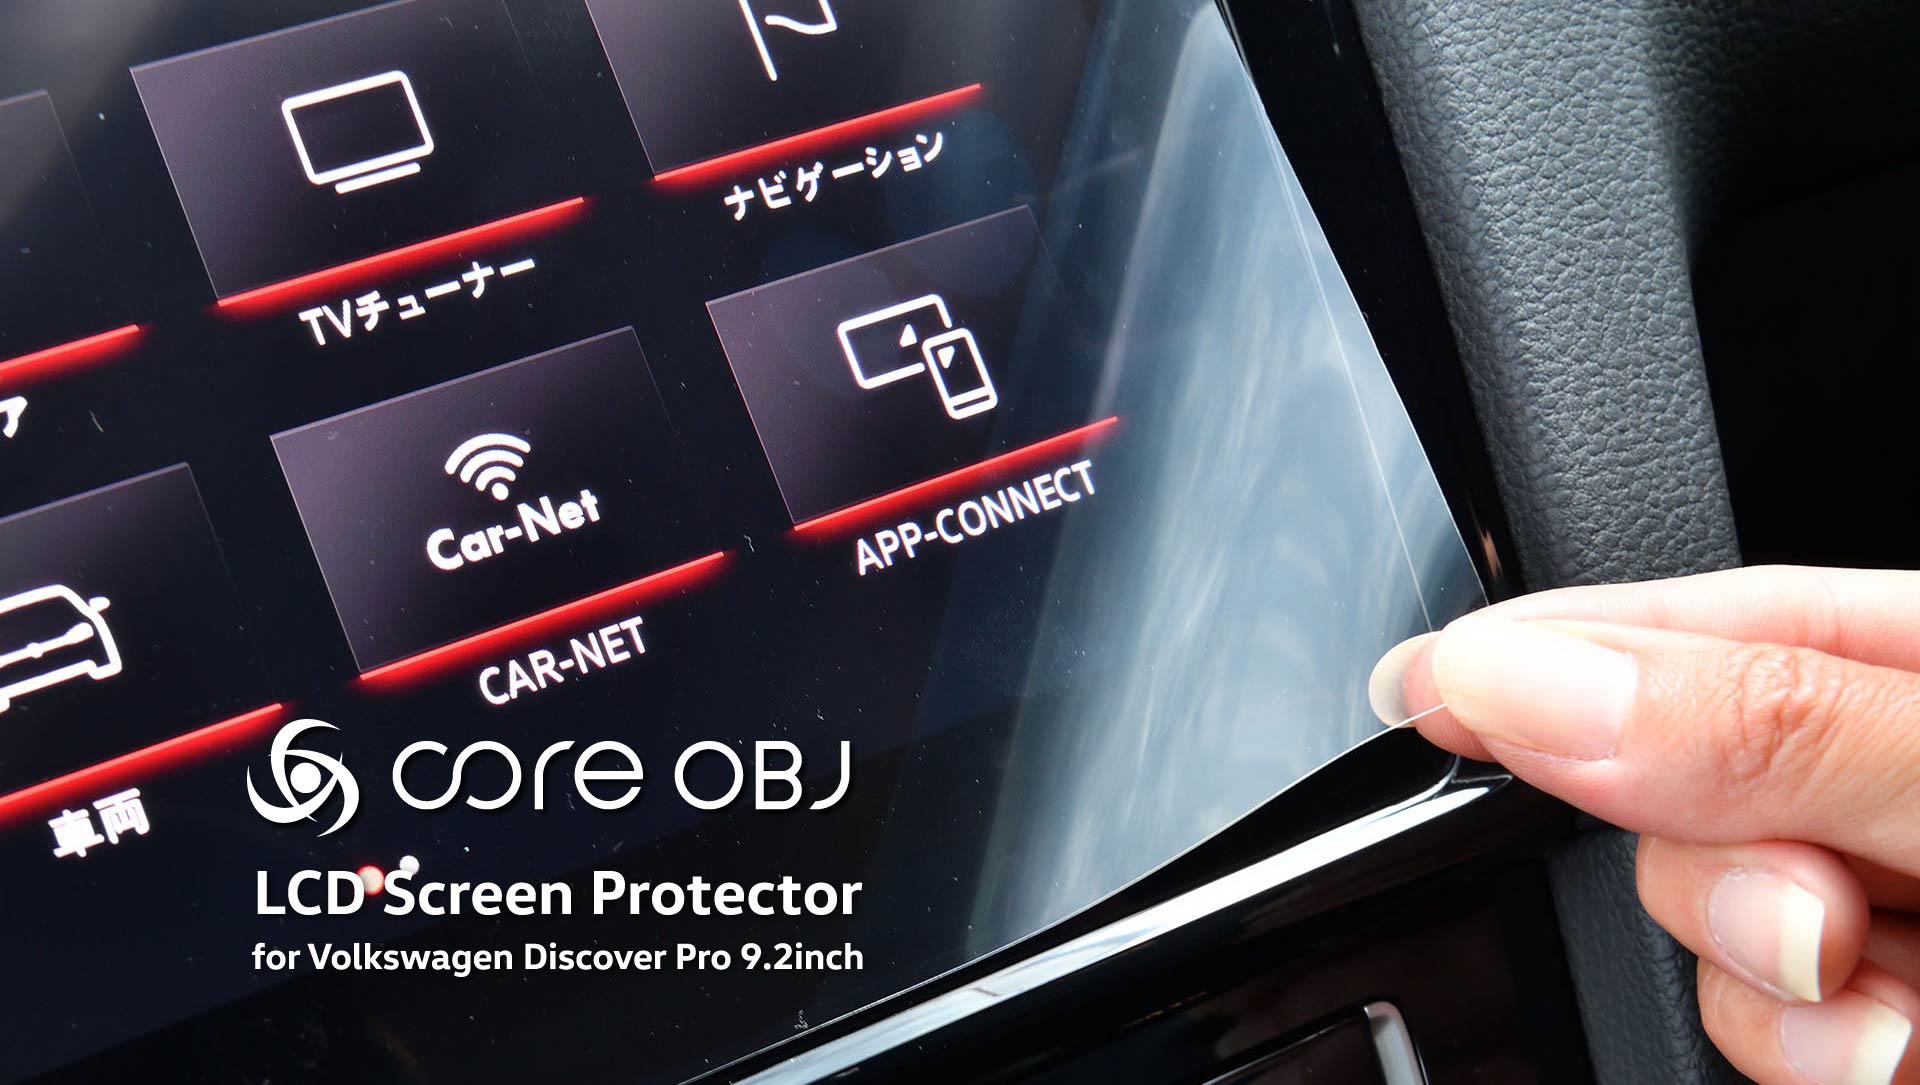 LCD Screen Protector for Volkswagen Discover Pro (9.2inch) / core obj